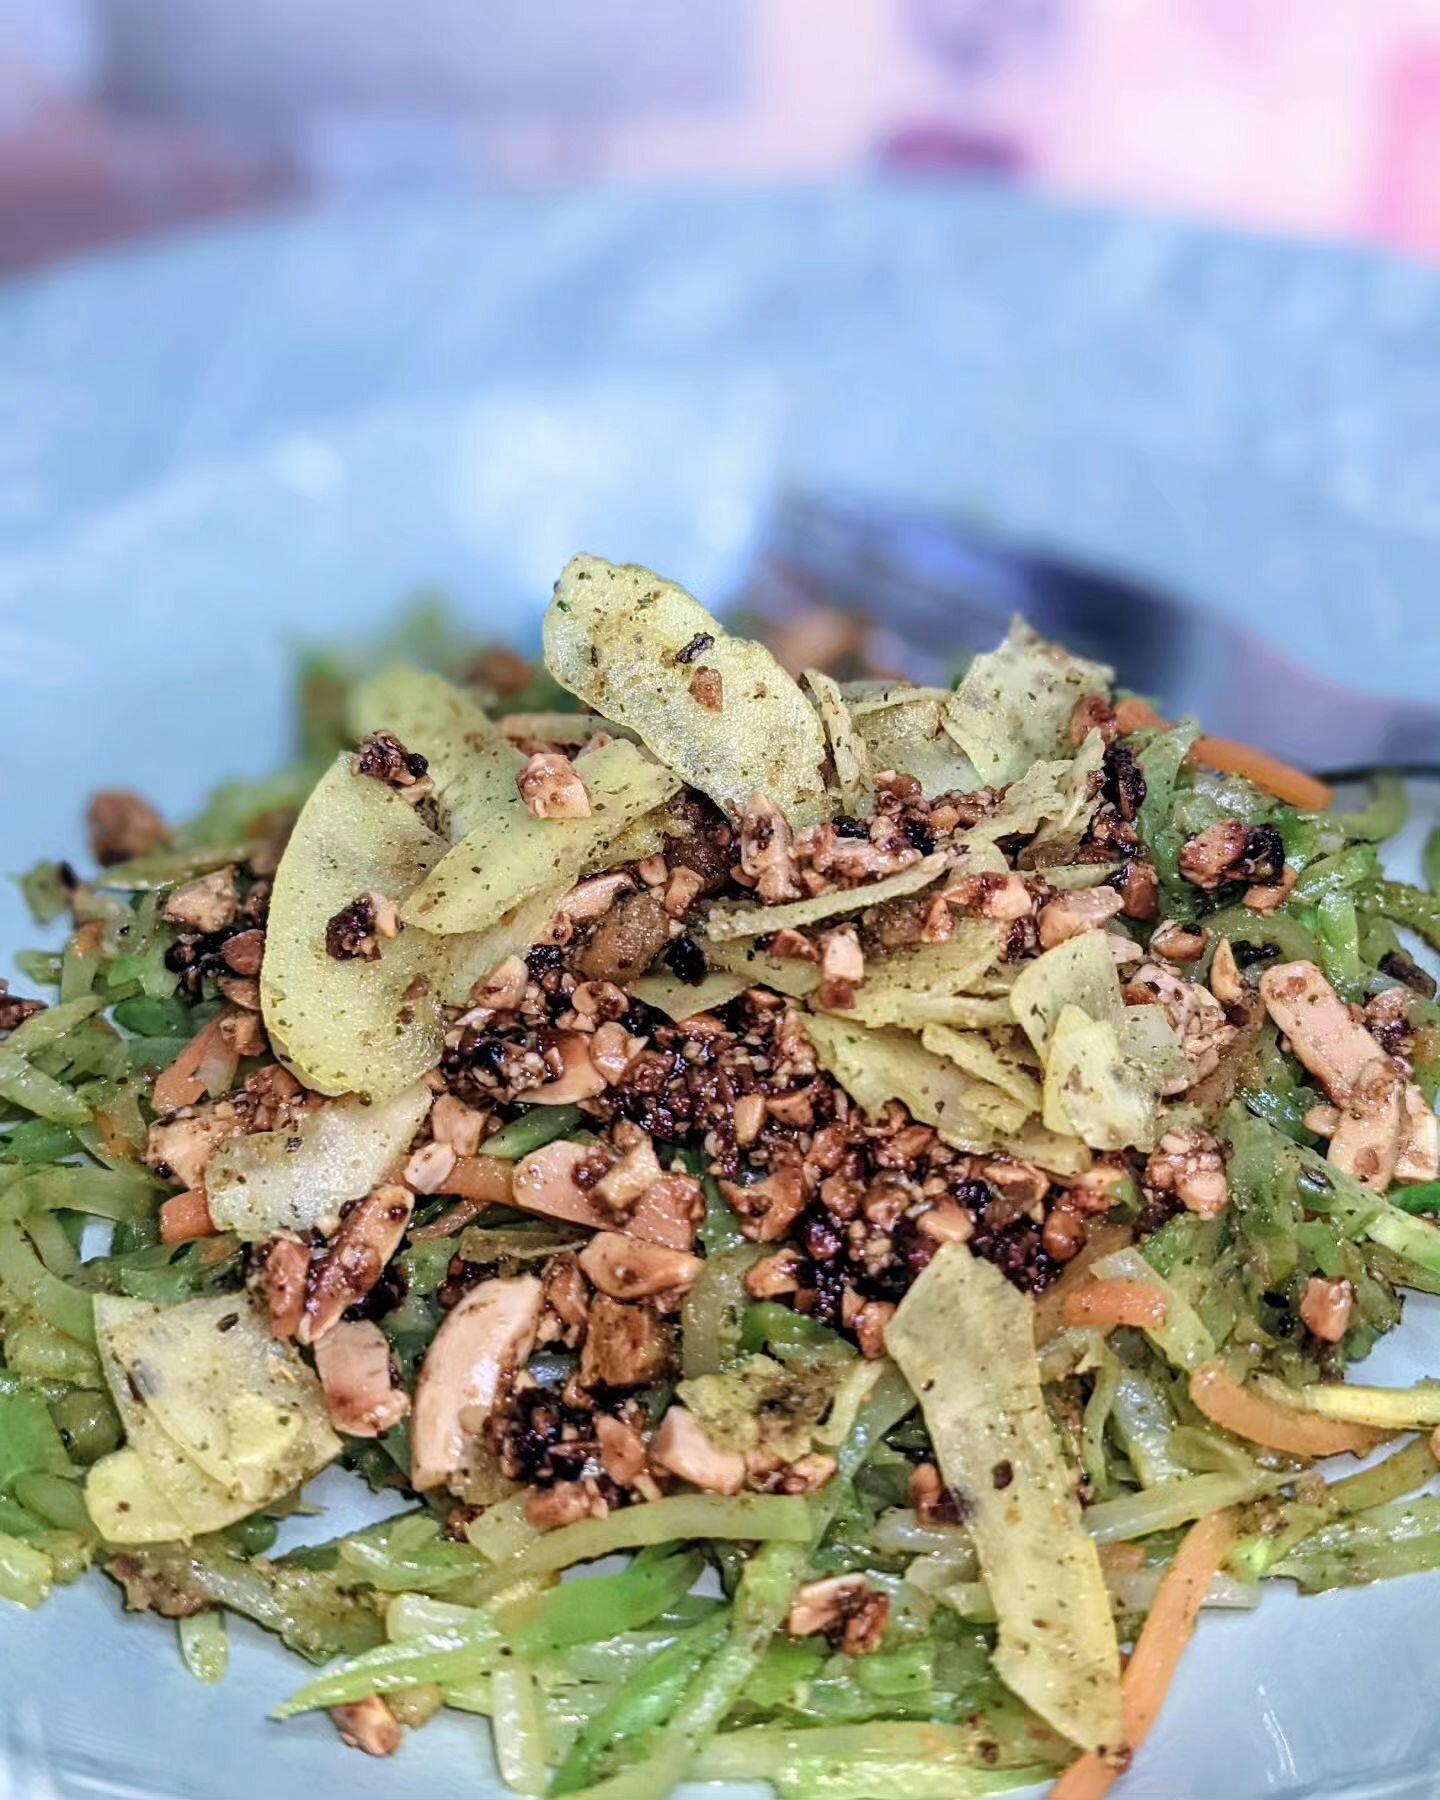 This salad is not only simple, but quick &amp; nutrient dense.

The veggie layer is saut&eacute;ed broccoli slaw, it is topped with almond faux meat &amp; faux bacon using coconut flakes. Each layer is seasoned using my Mushroom Stock Powder you can 